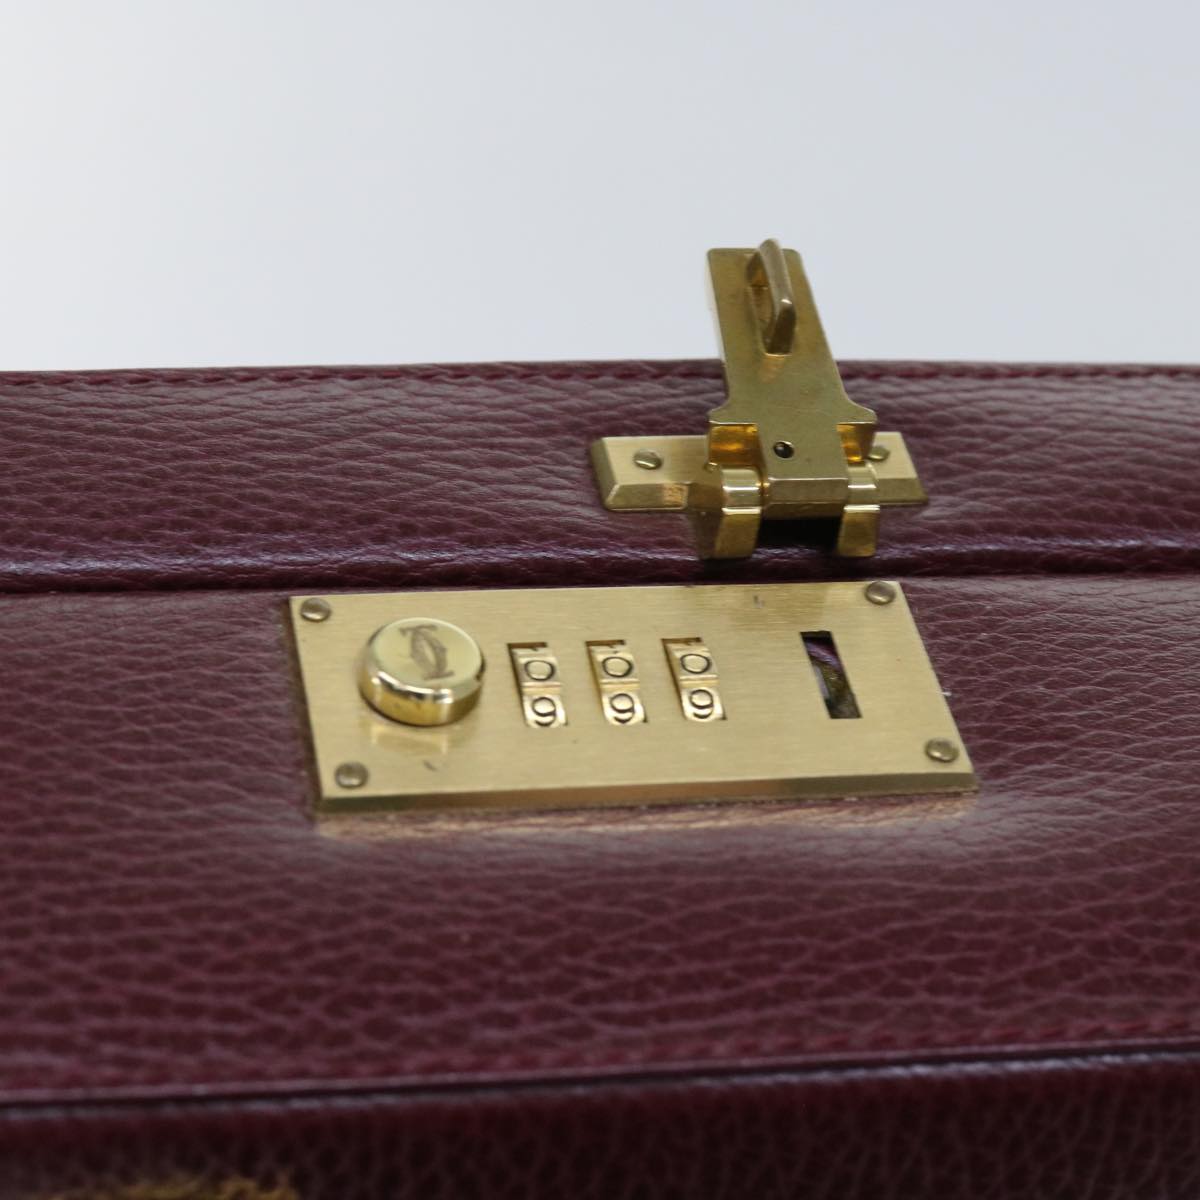 CARTIER Attache Case Trunk Leather Wine Red Auth ar11249